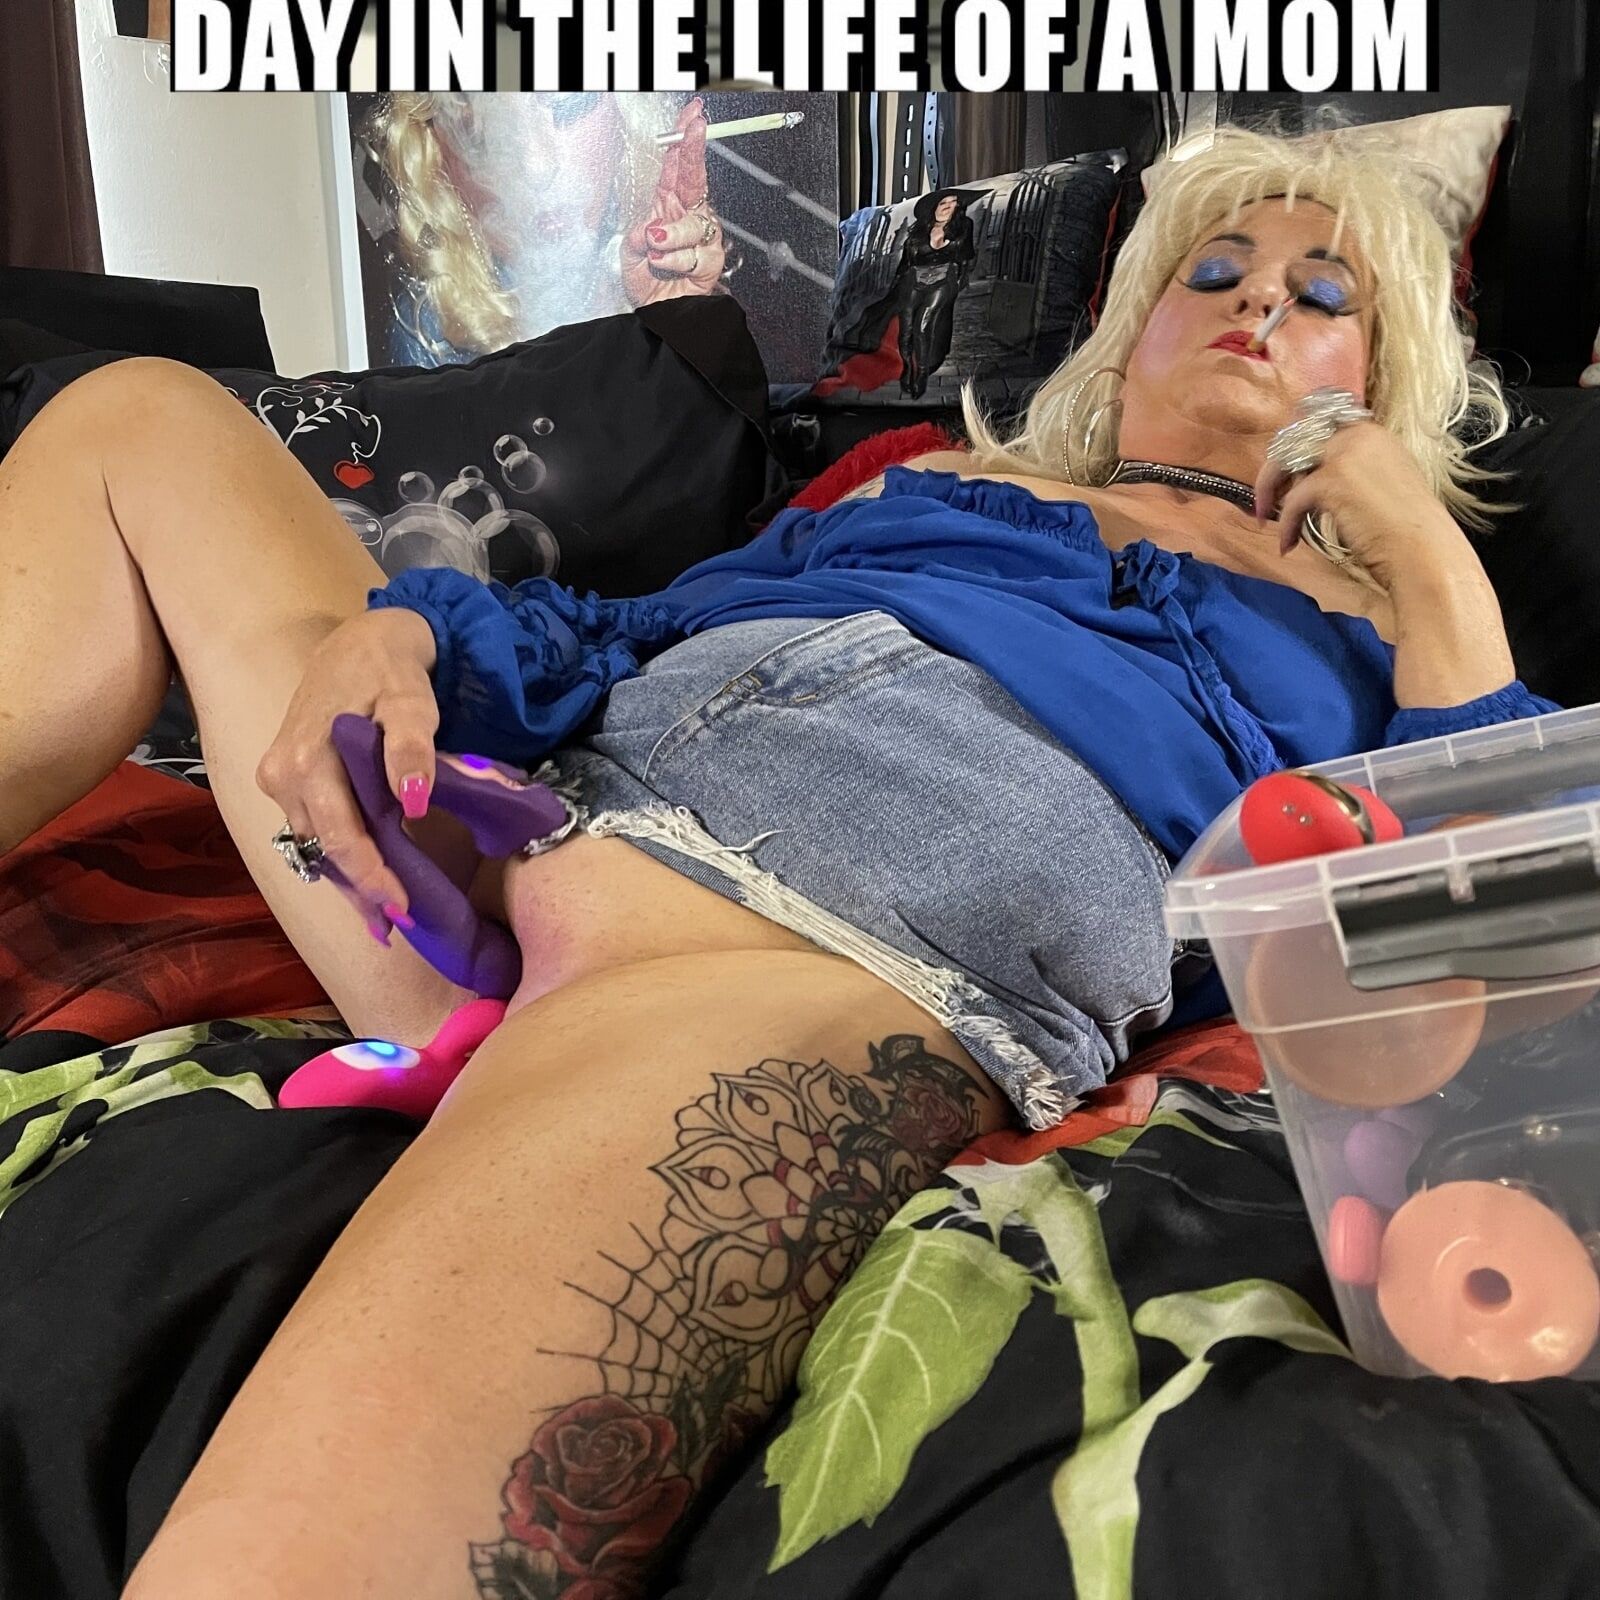 SHIRLEY THE LIFE OF A MOM #12